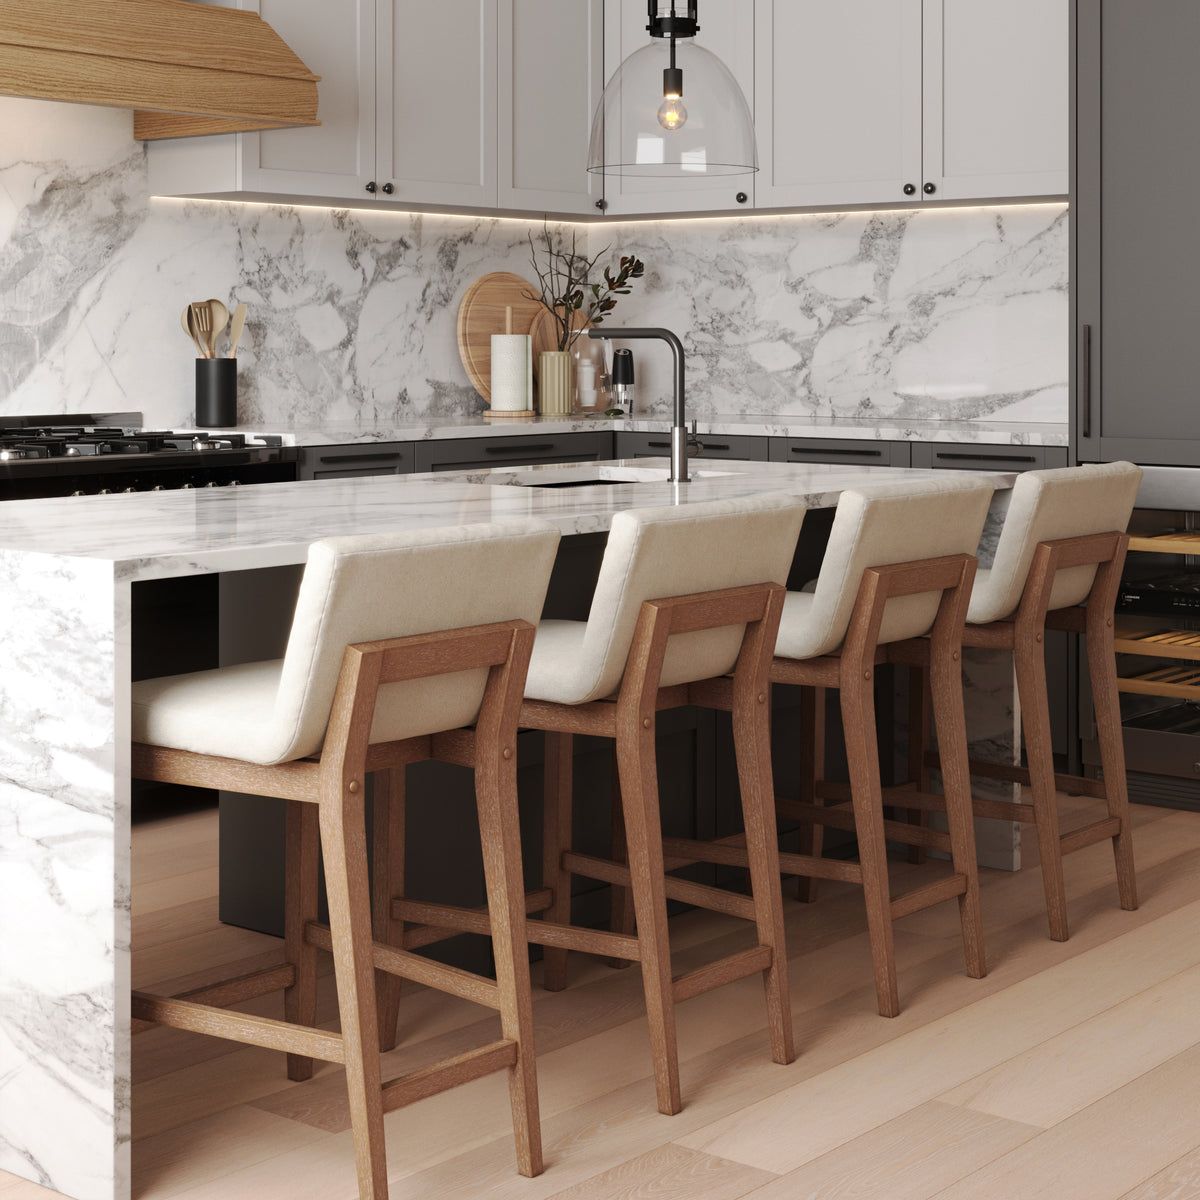 Choosing the Perfect Kitchen Bar Stools for Your Home